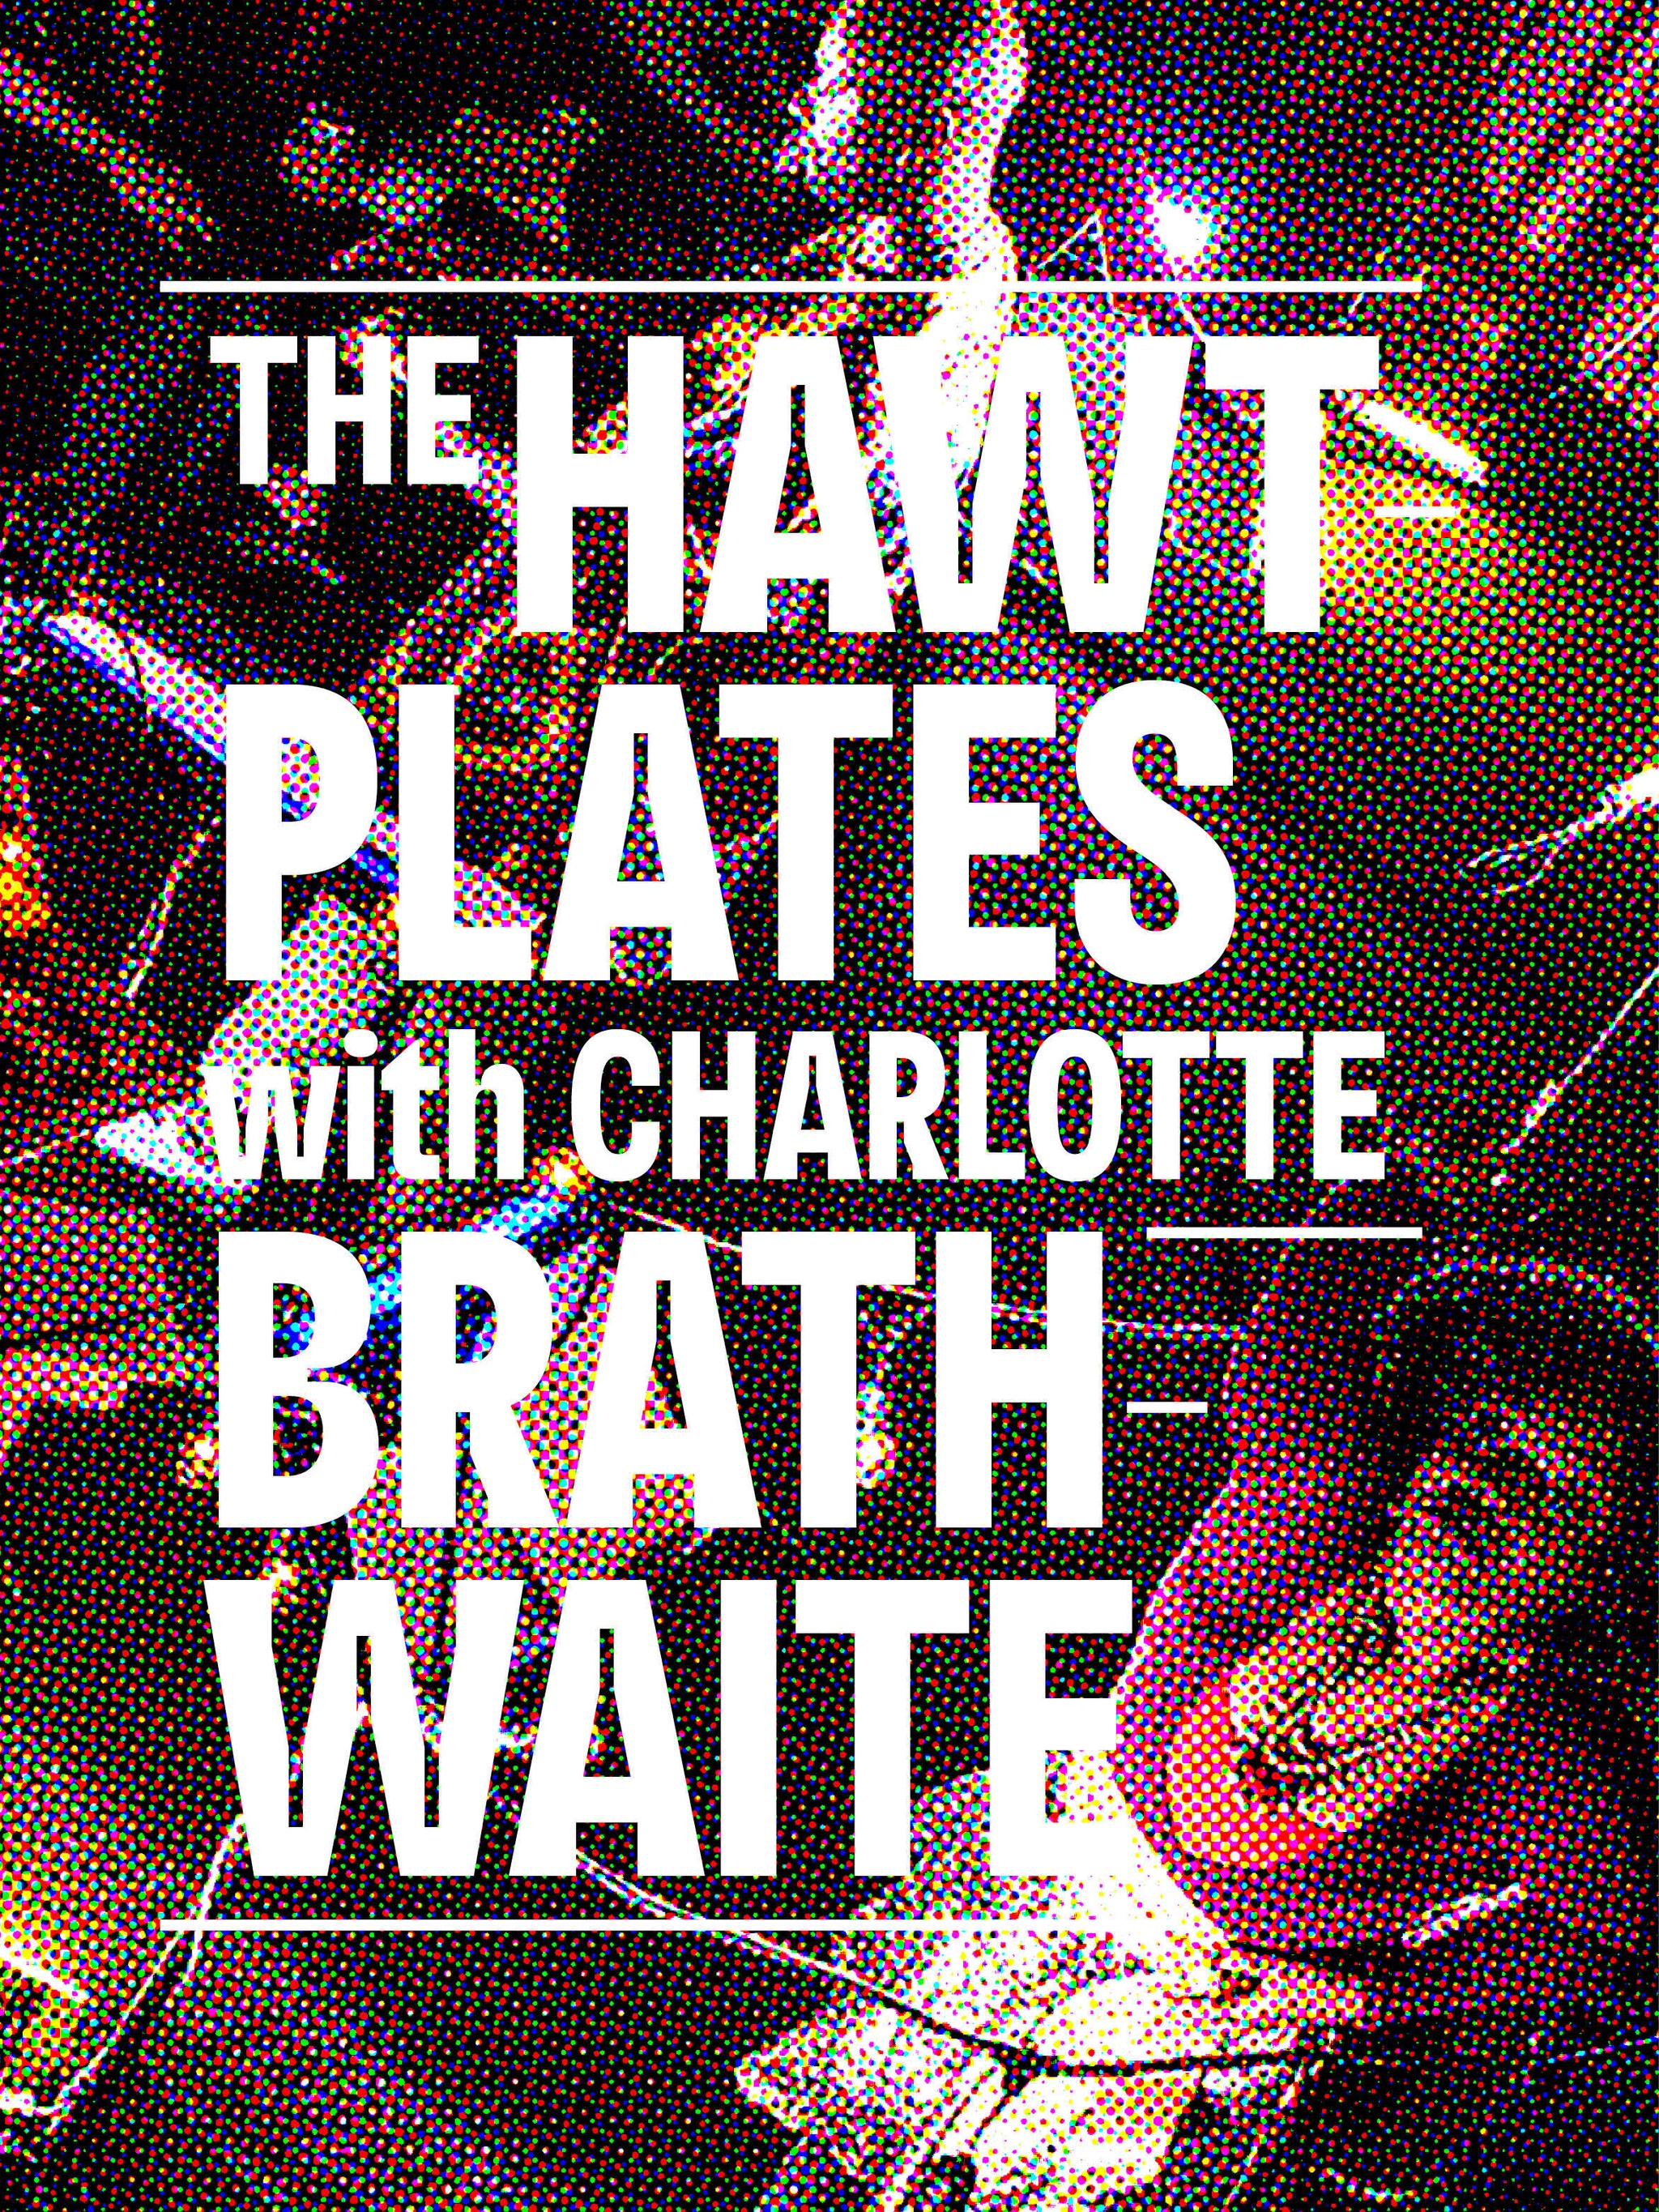 An aerial photo of three musicians performing in a domestic interior surrounded by audience members with the words The HawtPlates with Charlotte Brathwaite superimposed in white on the image